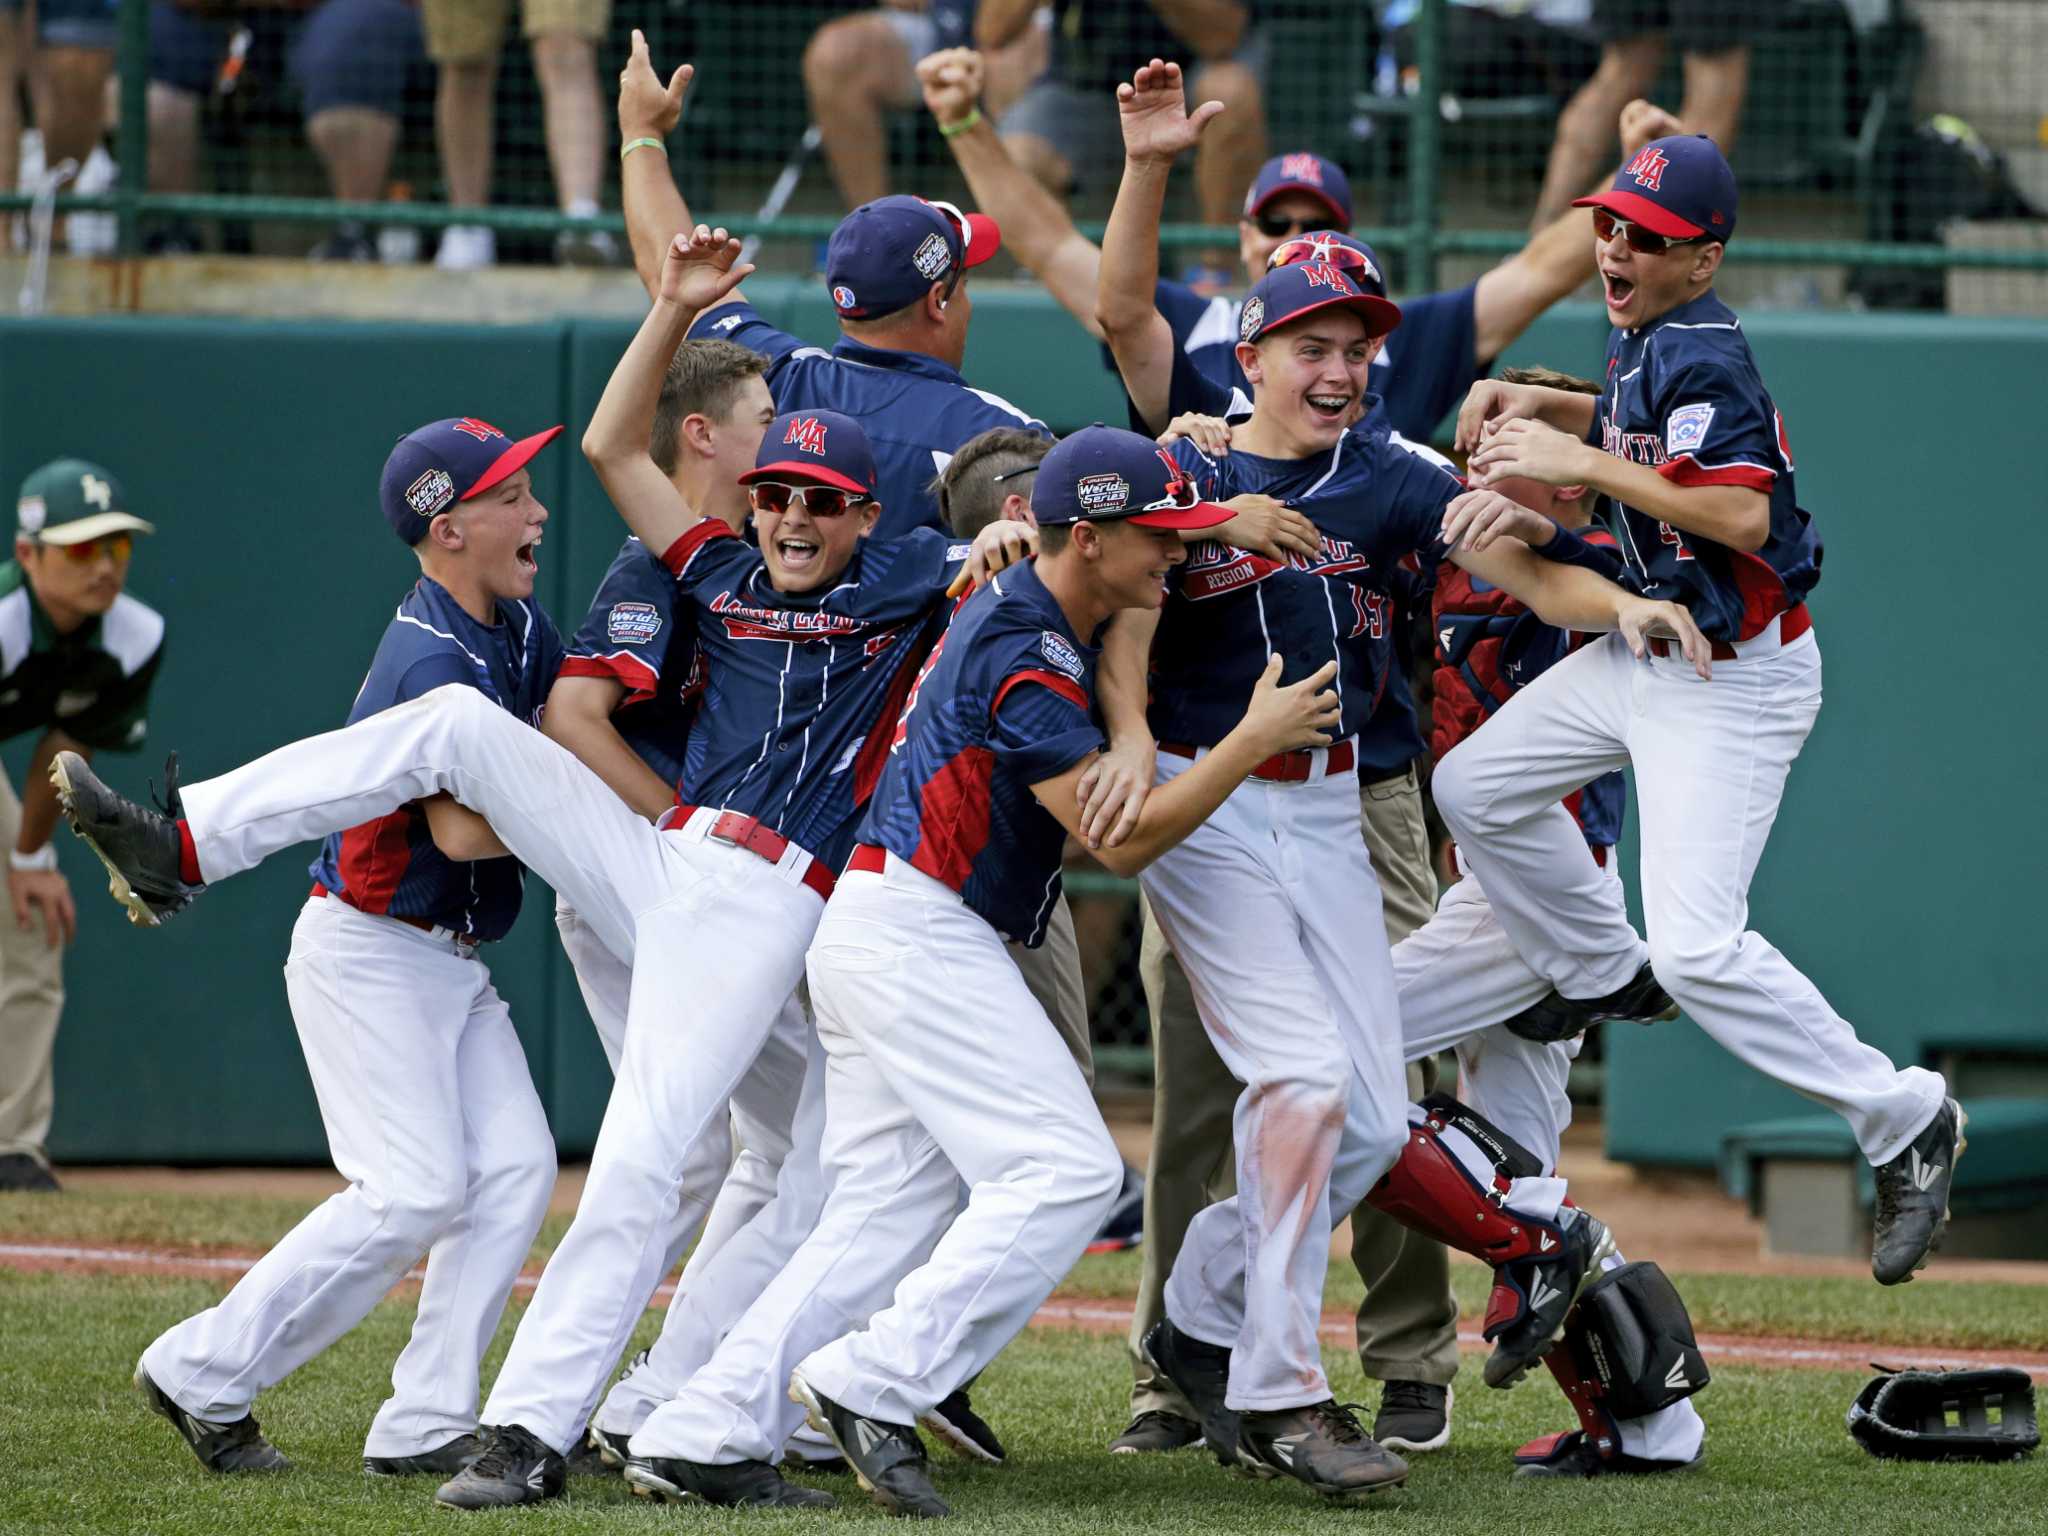 Jude Abbadessa leads New York to win at LLWS